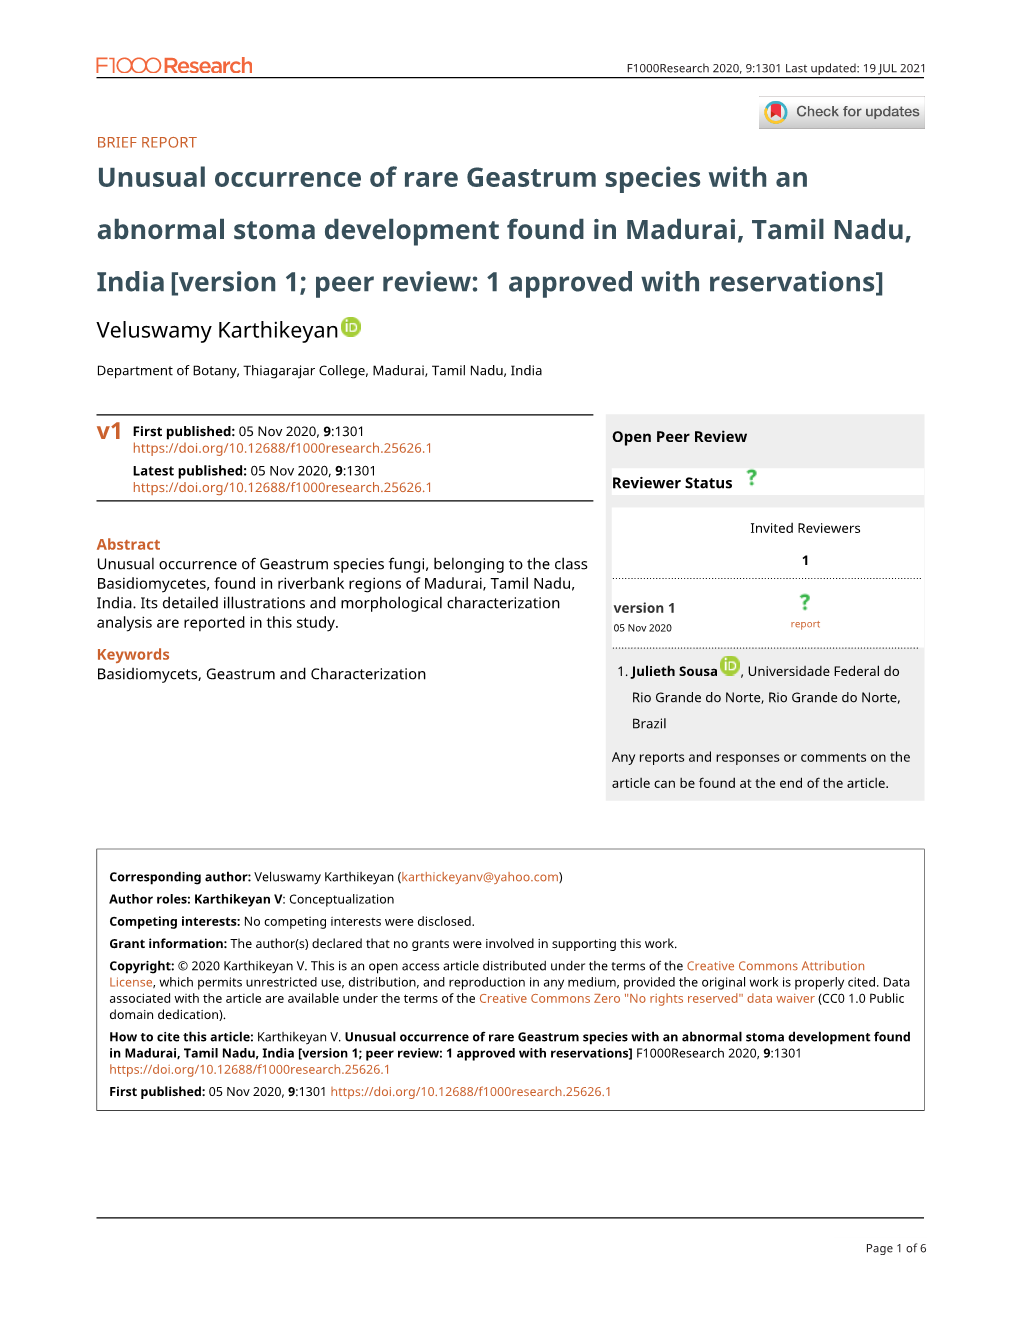 Unusual Occurrence of Rare Geastrum Species with an Abnormal Stoma Development Found in Madurai, Tamil Nadu